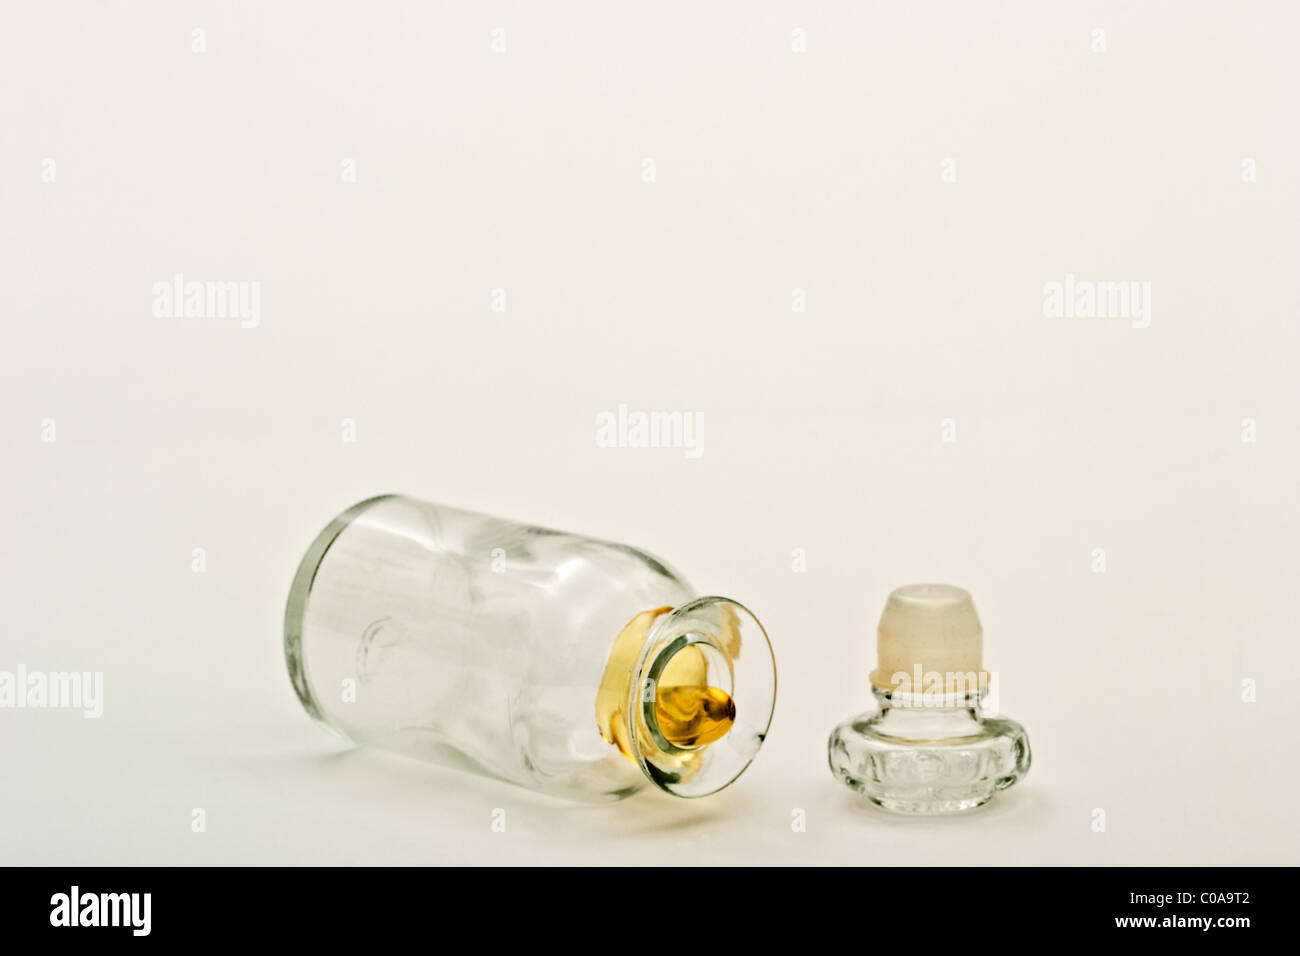 Single vitamin pill inside an old fashioned apothecary bottle with the cover off. Stock Photo